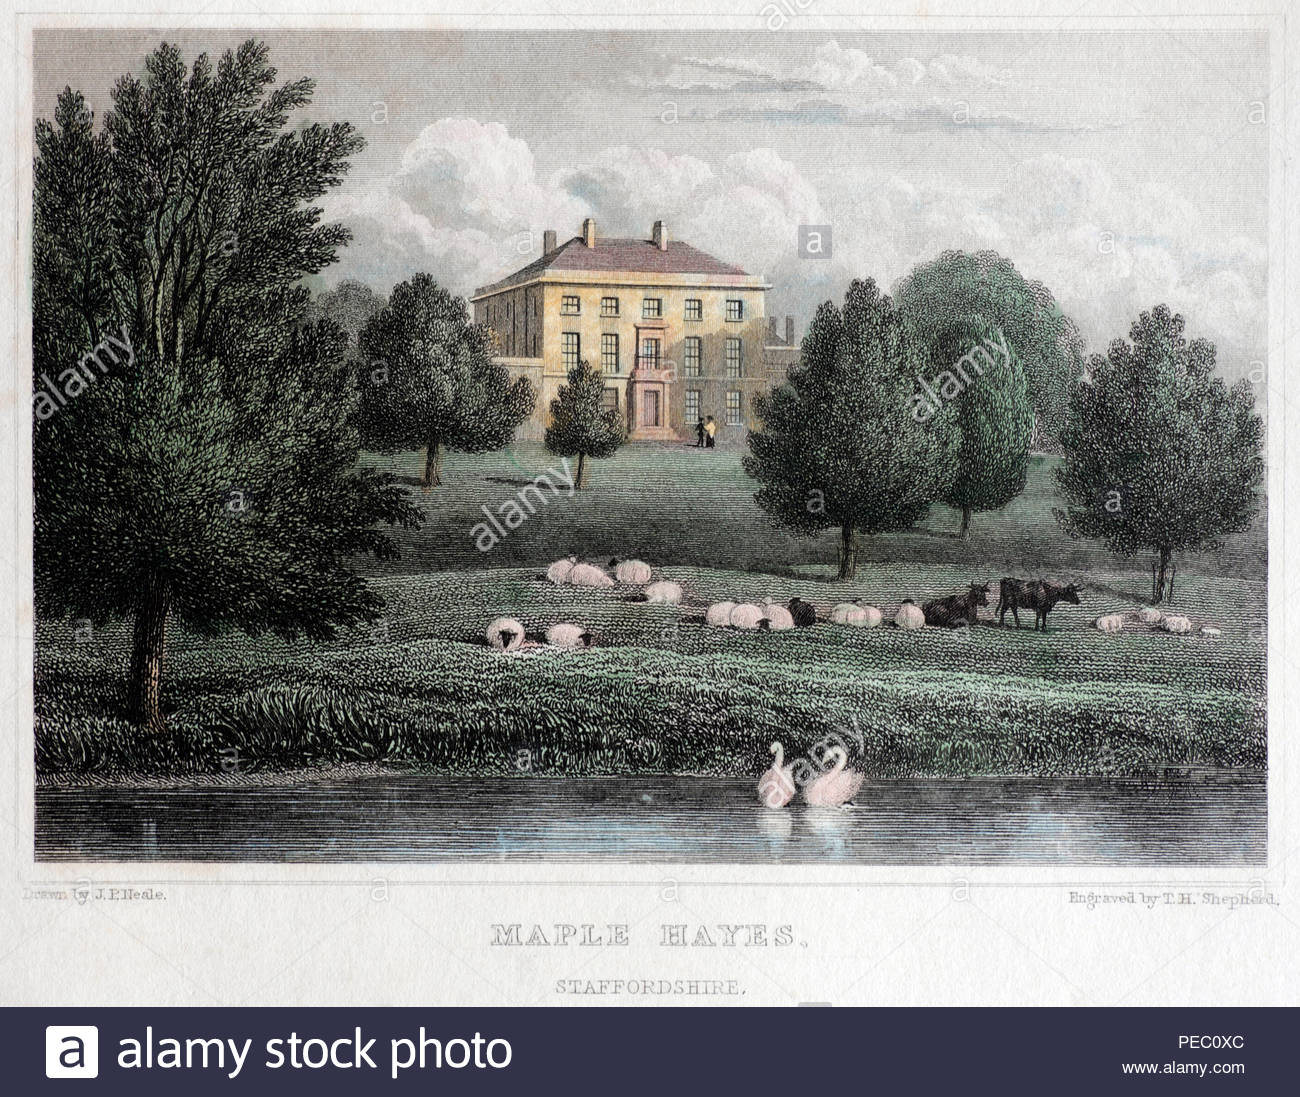 Country School Painting Stock Photos & Country School Painting Stock Images - Alamy